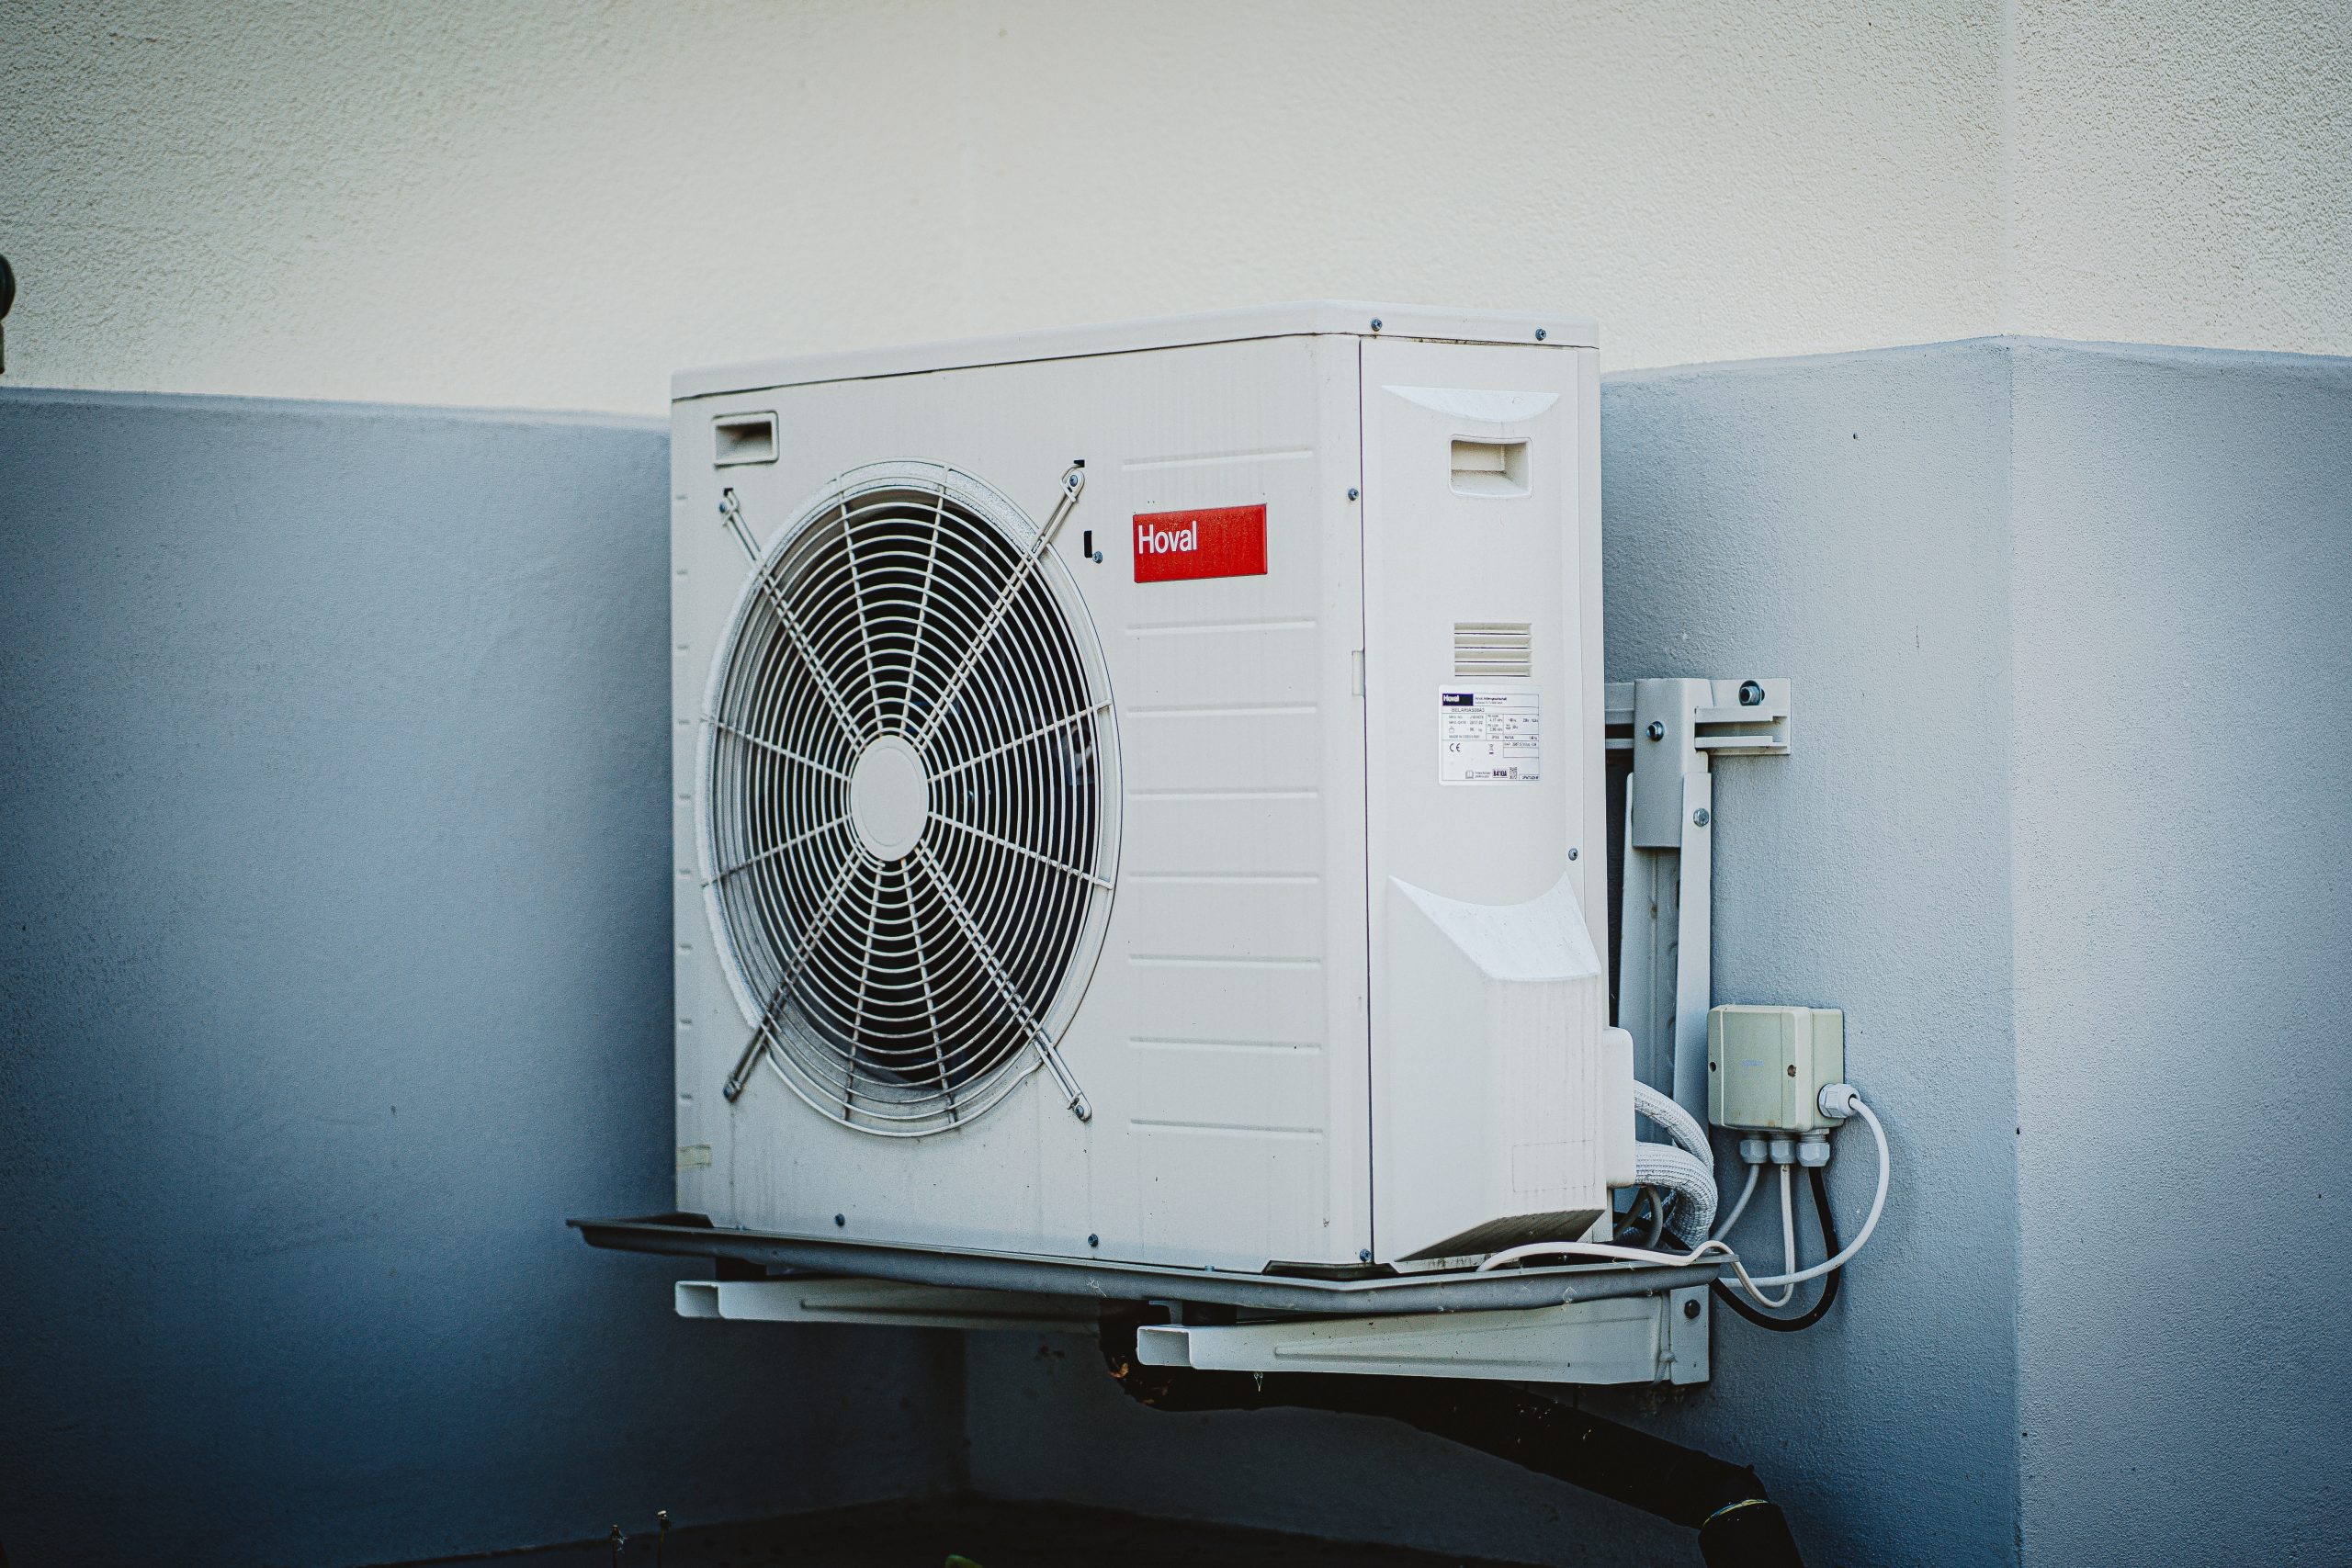 6 Reasons Why Cleaning Your Air Conditioner Regularly Is Important